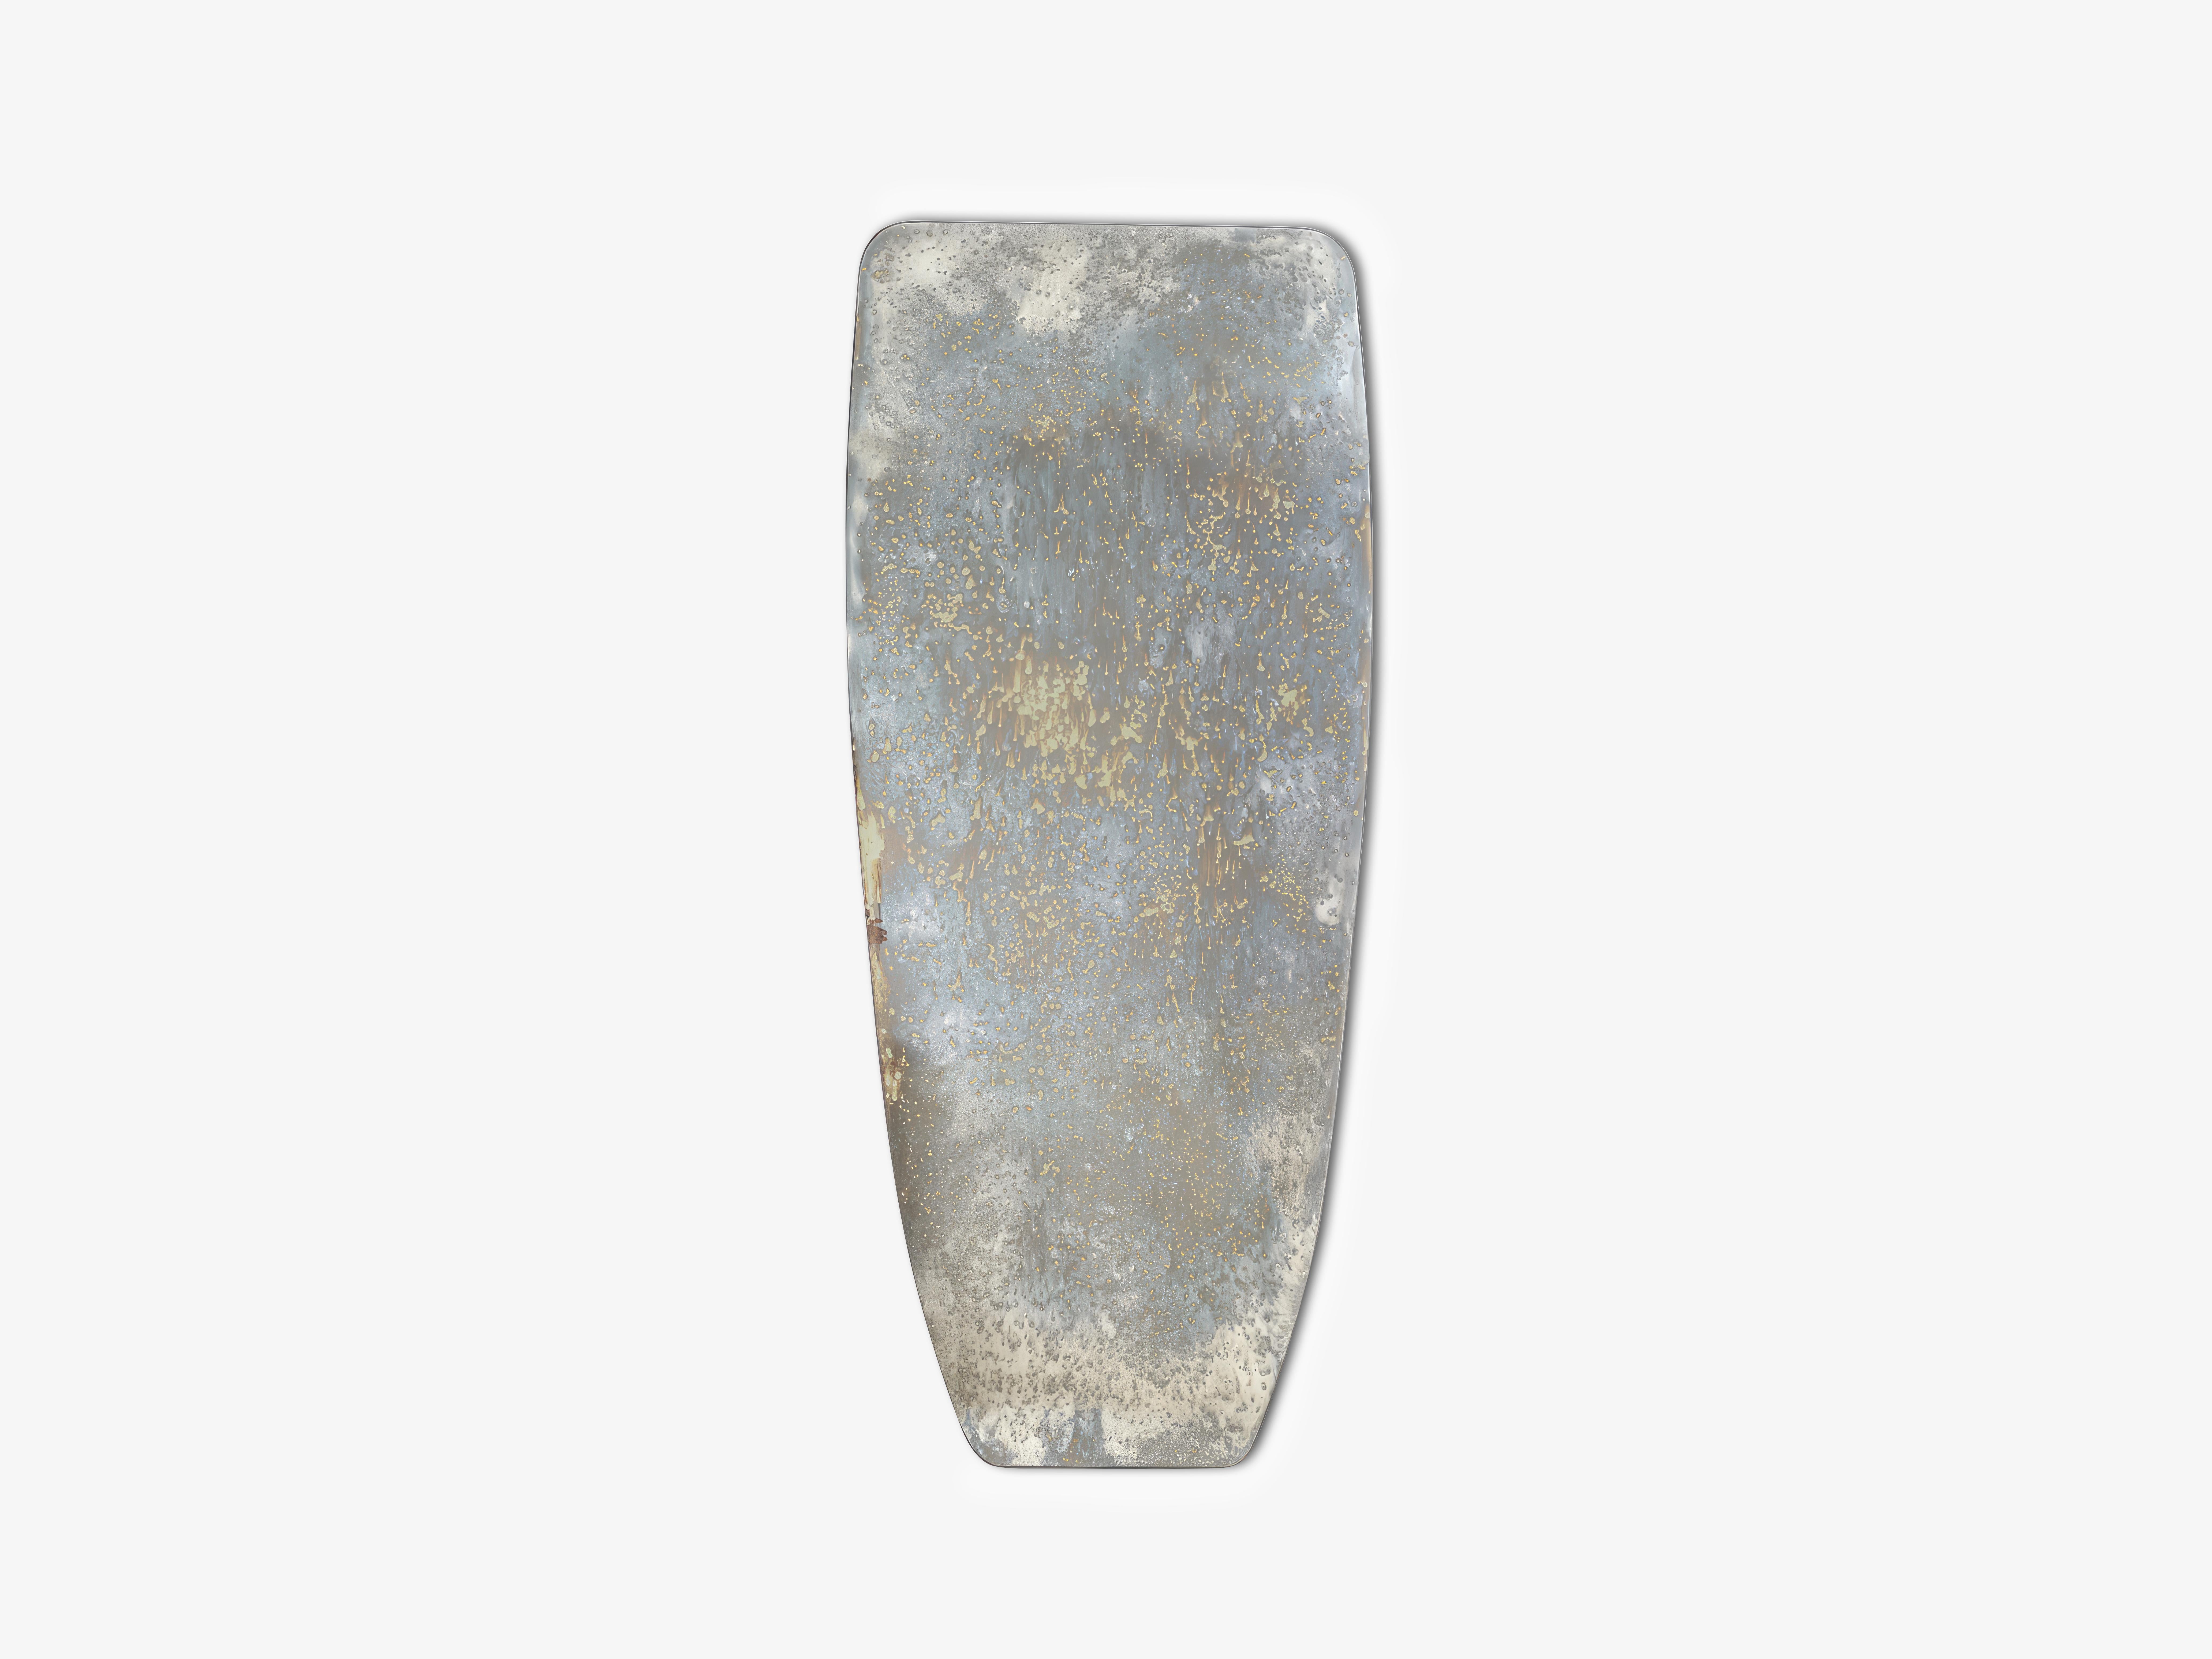 Pedra Mirror by OHLA STUDIO
Dimensions: D 3 x W 93 x H 220 cm 
Materials: Oxidized mirror, brushed steel. 
60 kg

Inspired in the pattern by the lichen formations that naturally grow on rocky surfaces, the shape recalls megalithic sculptures, one of